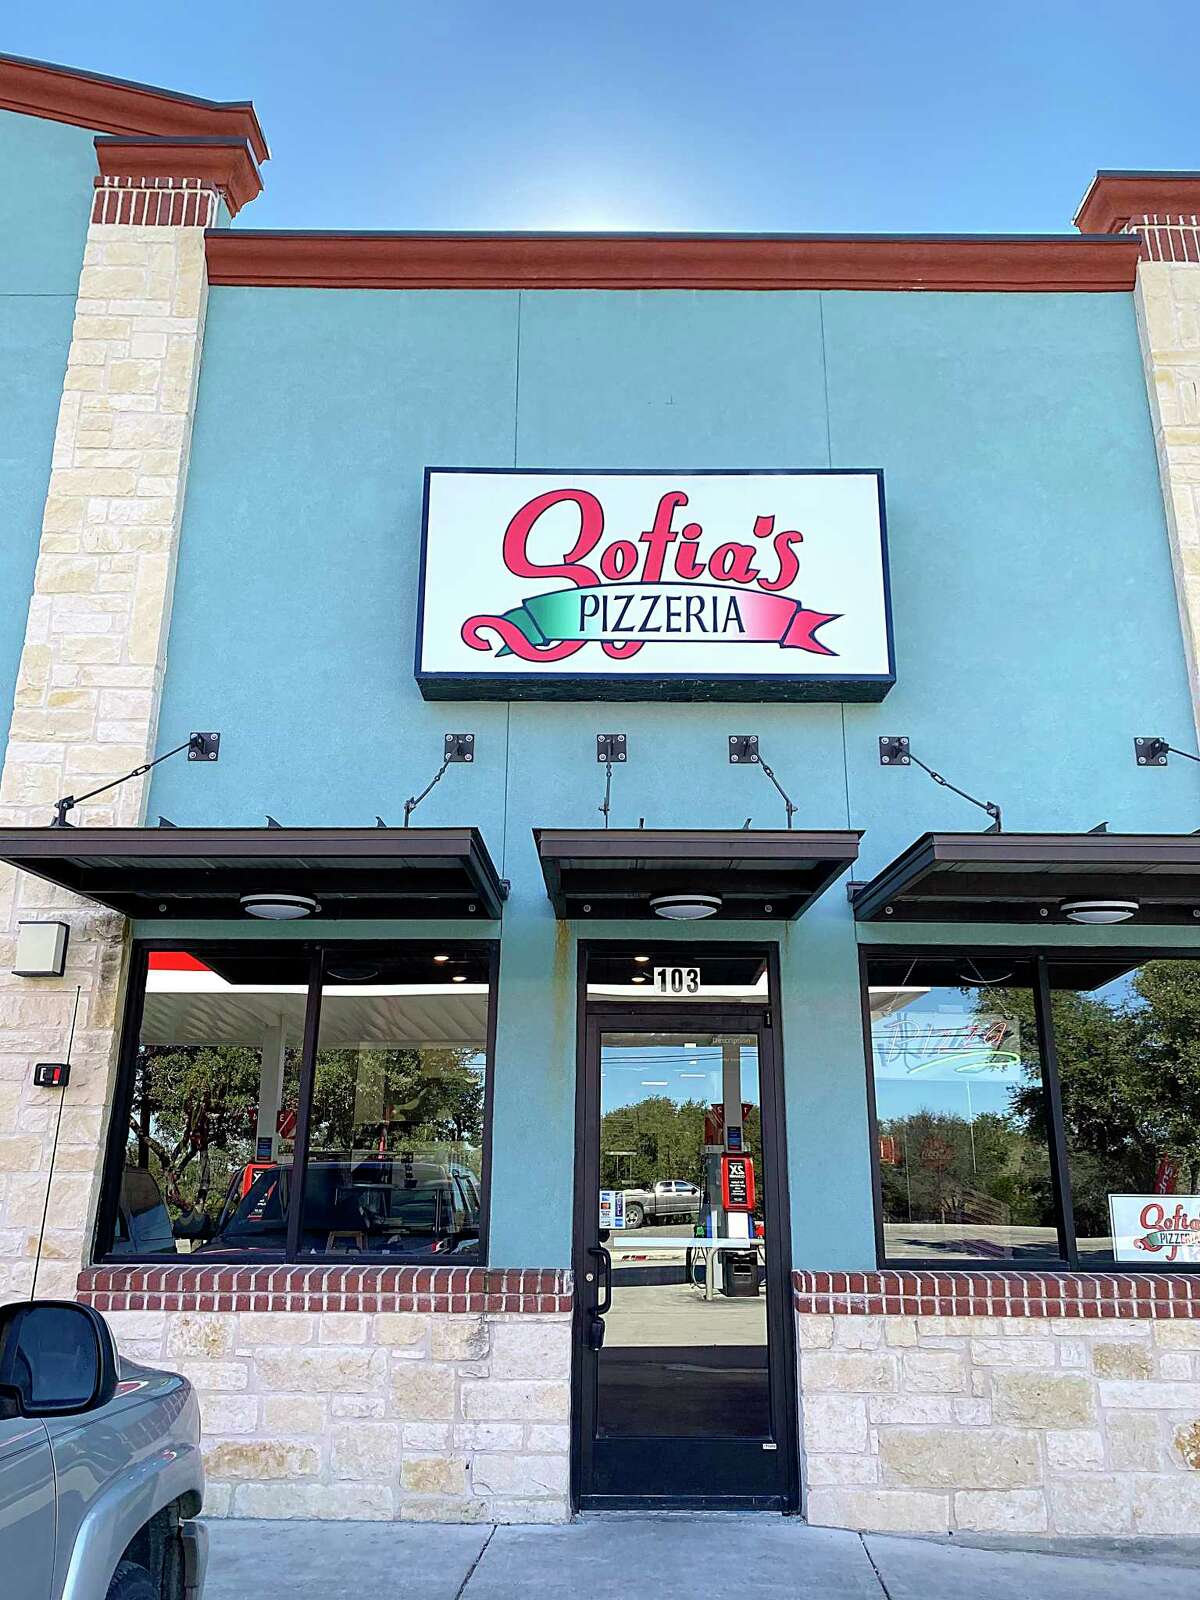 Sofia's Pizzeria sits in a small strip center on Potranco Road that includes a convenience store, gas station and a Mexican restaurant.